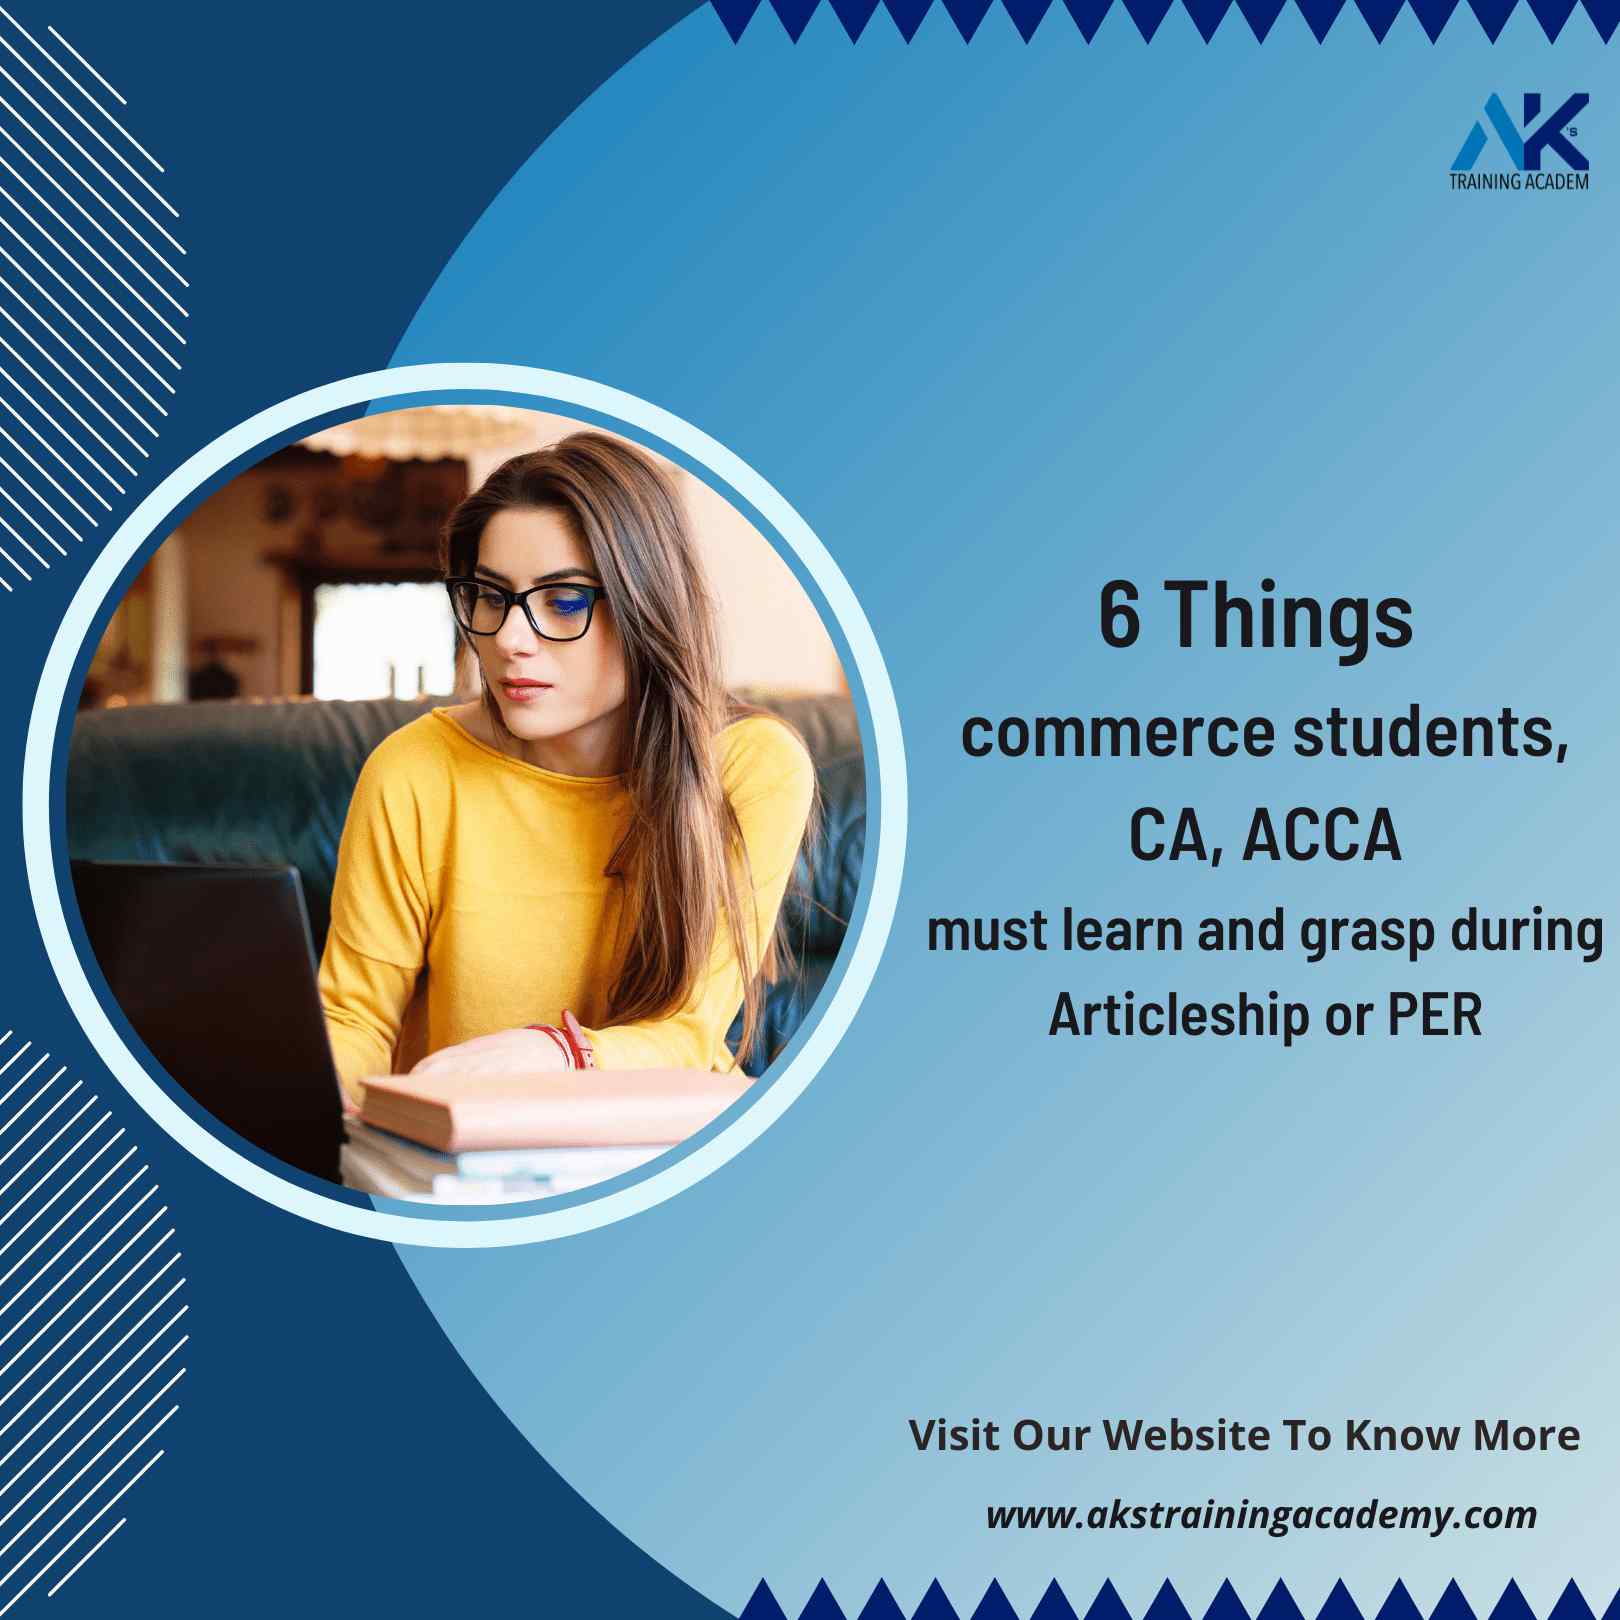 6 things Commerce students learn about PER or Articleship